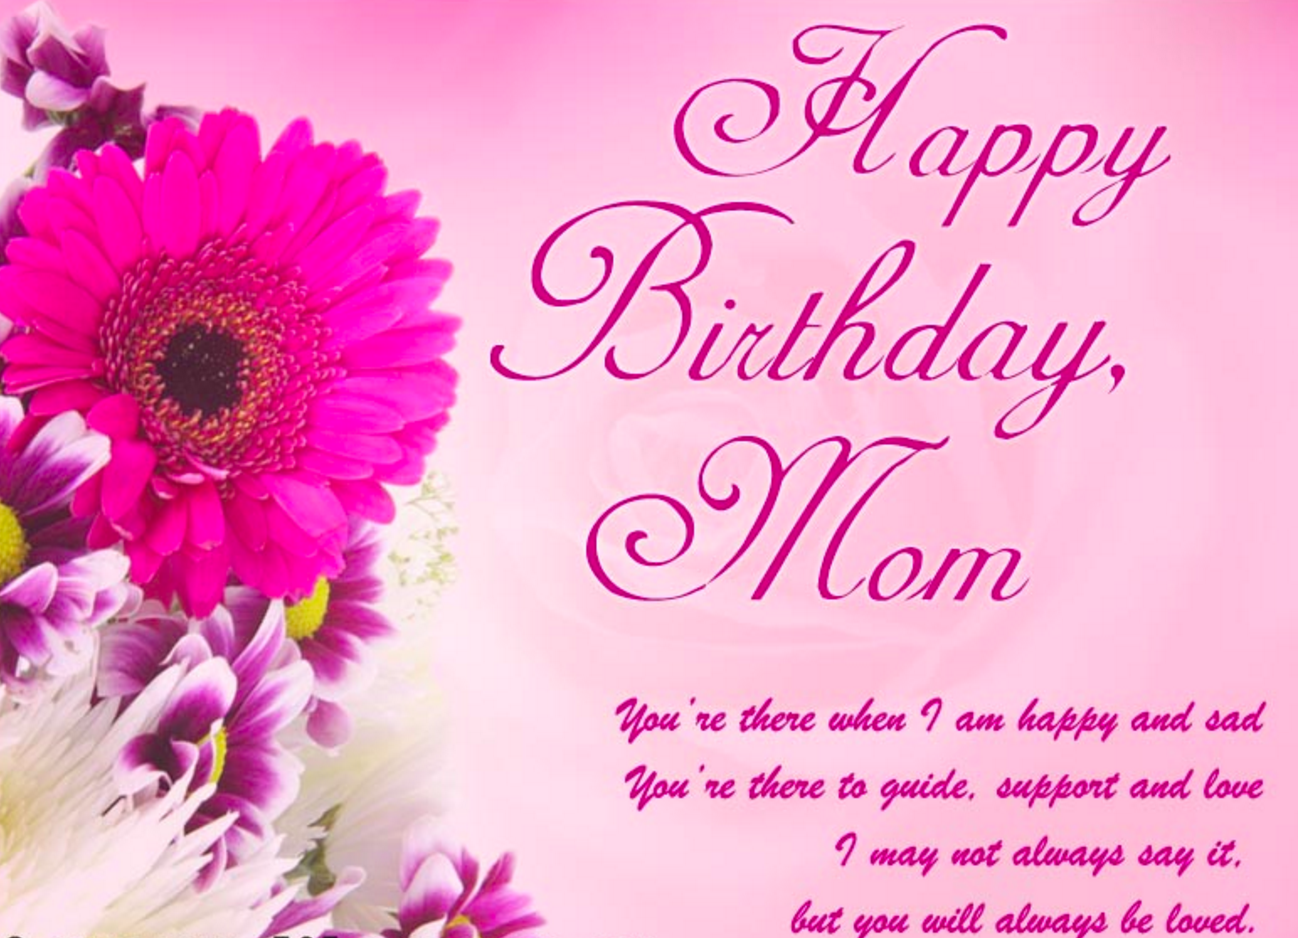 10 Heartfelt Birthday Cards with Quotes to send to your lovely Mom